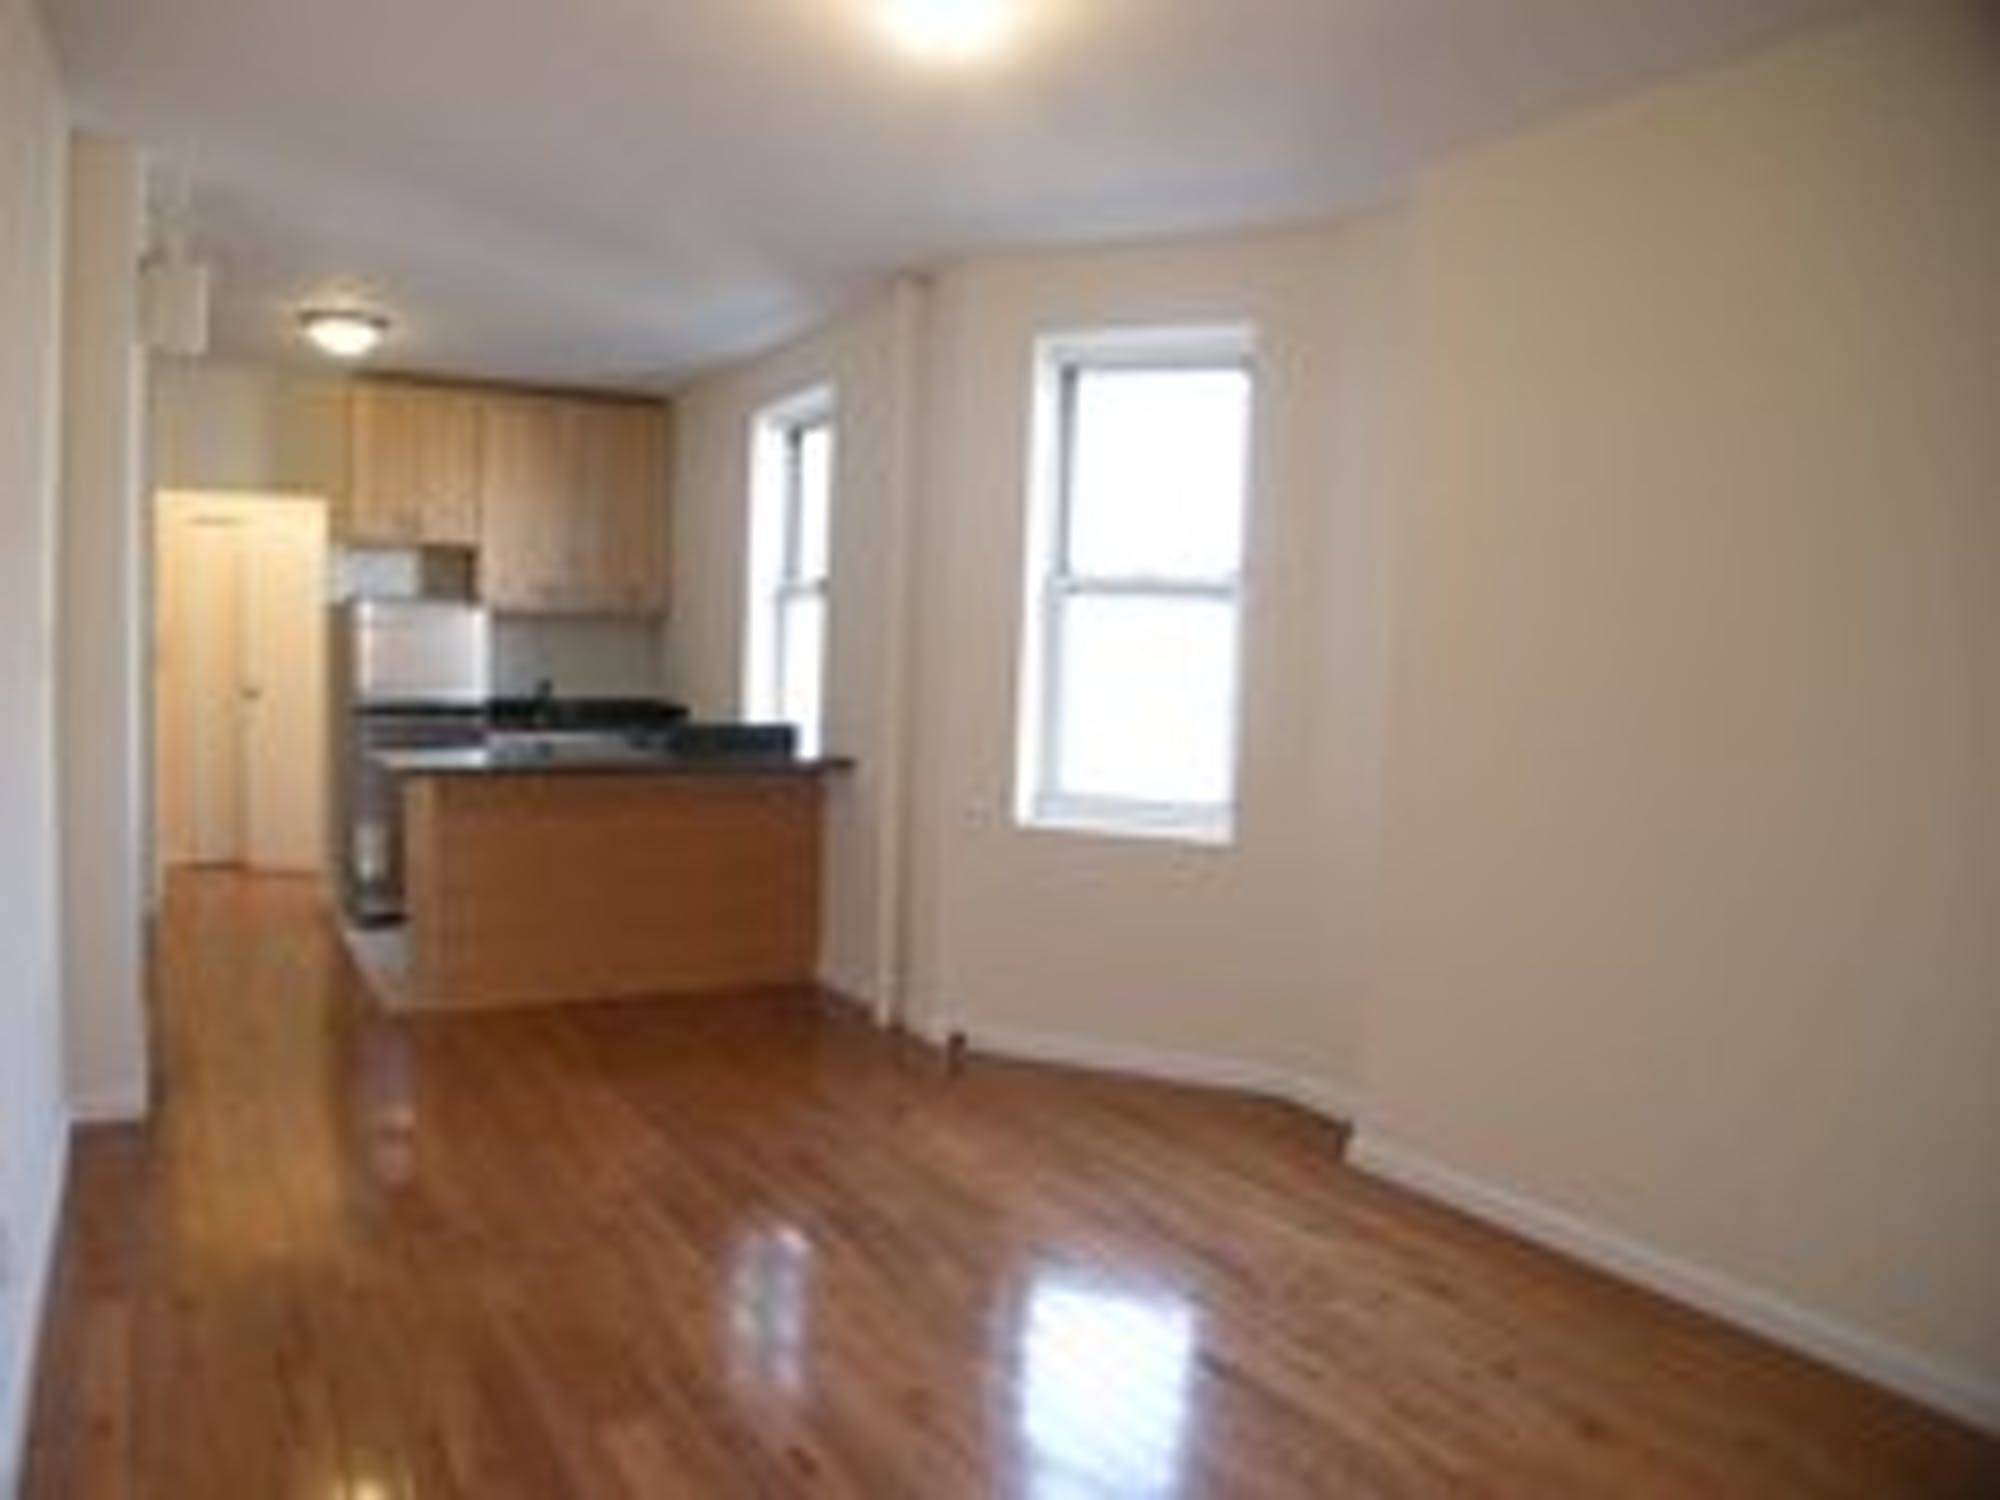 NEWLY RENOVATED 1 BEDROOM HUGE LIVING ROOM GREAT NATURAL LIGHT !